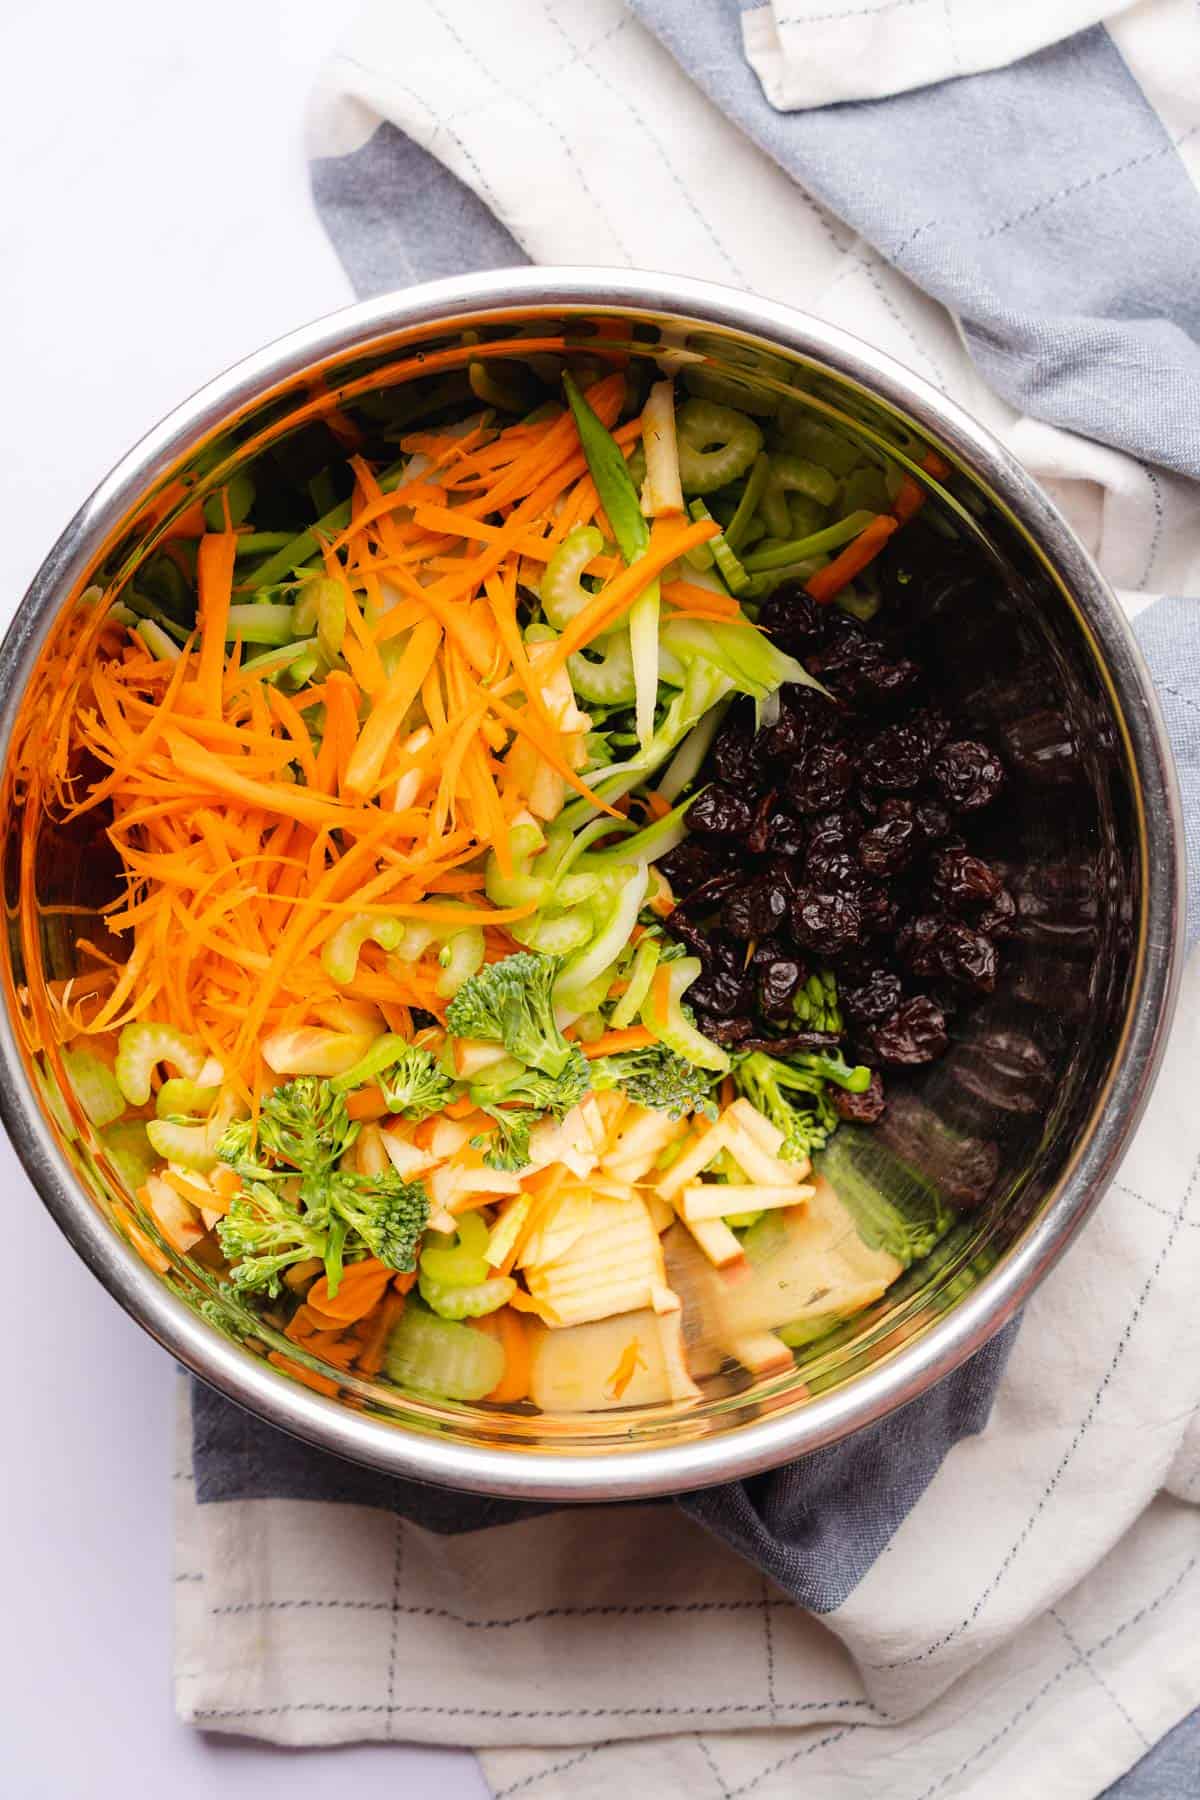 carrots, apples, dried cherries, celery and broccolini in a large bowl